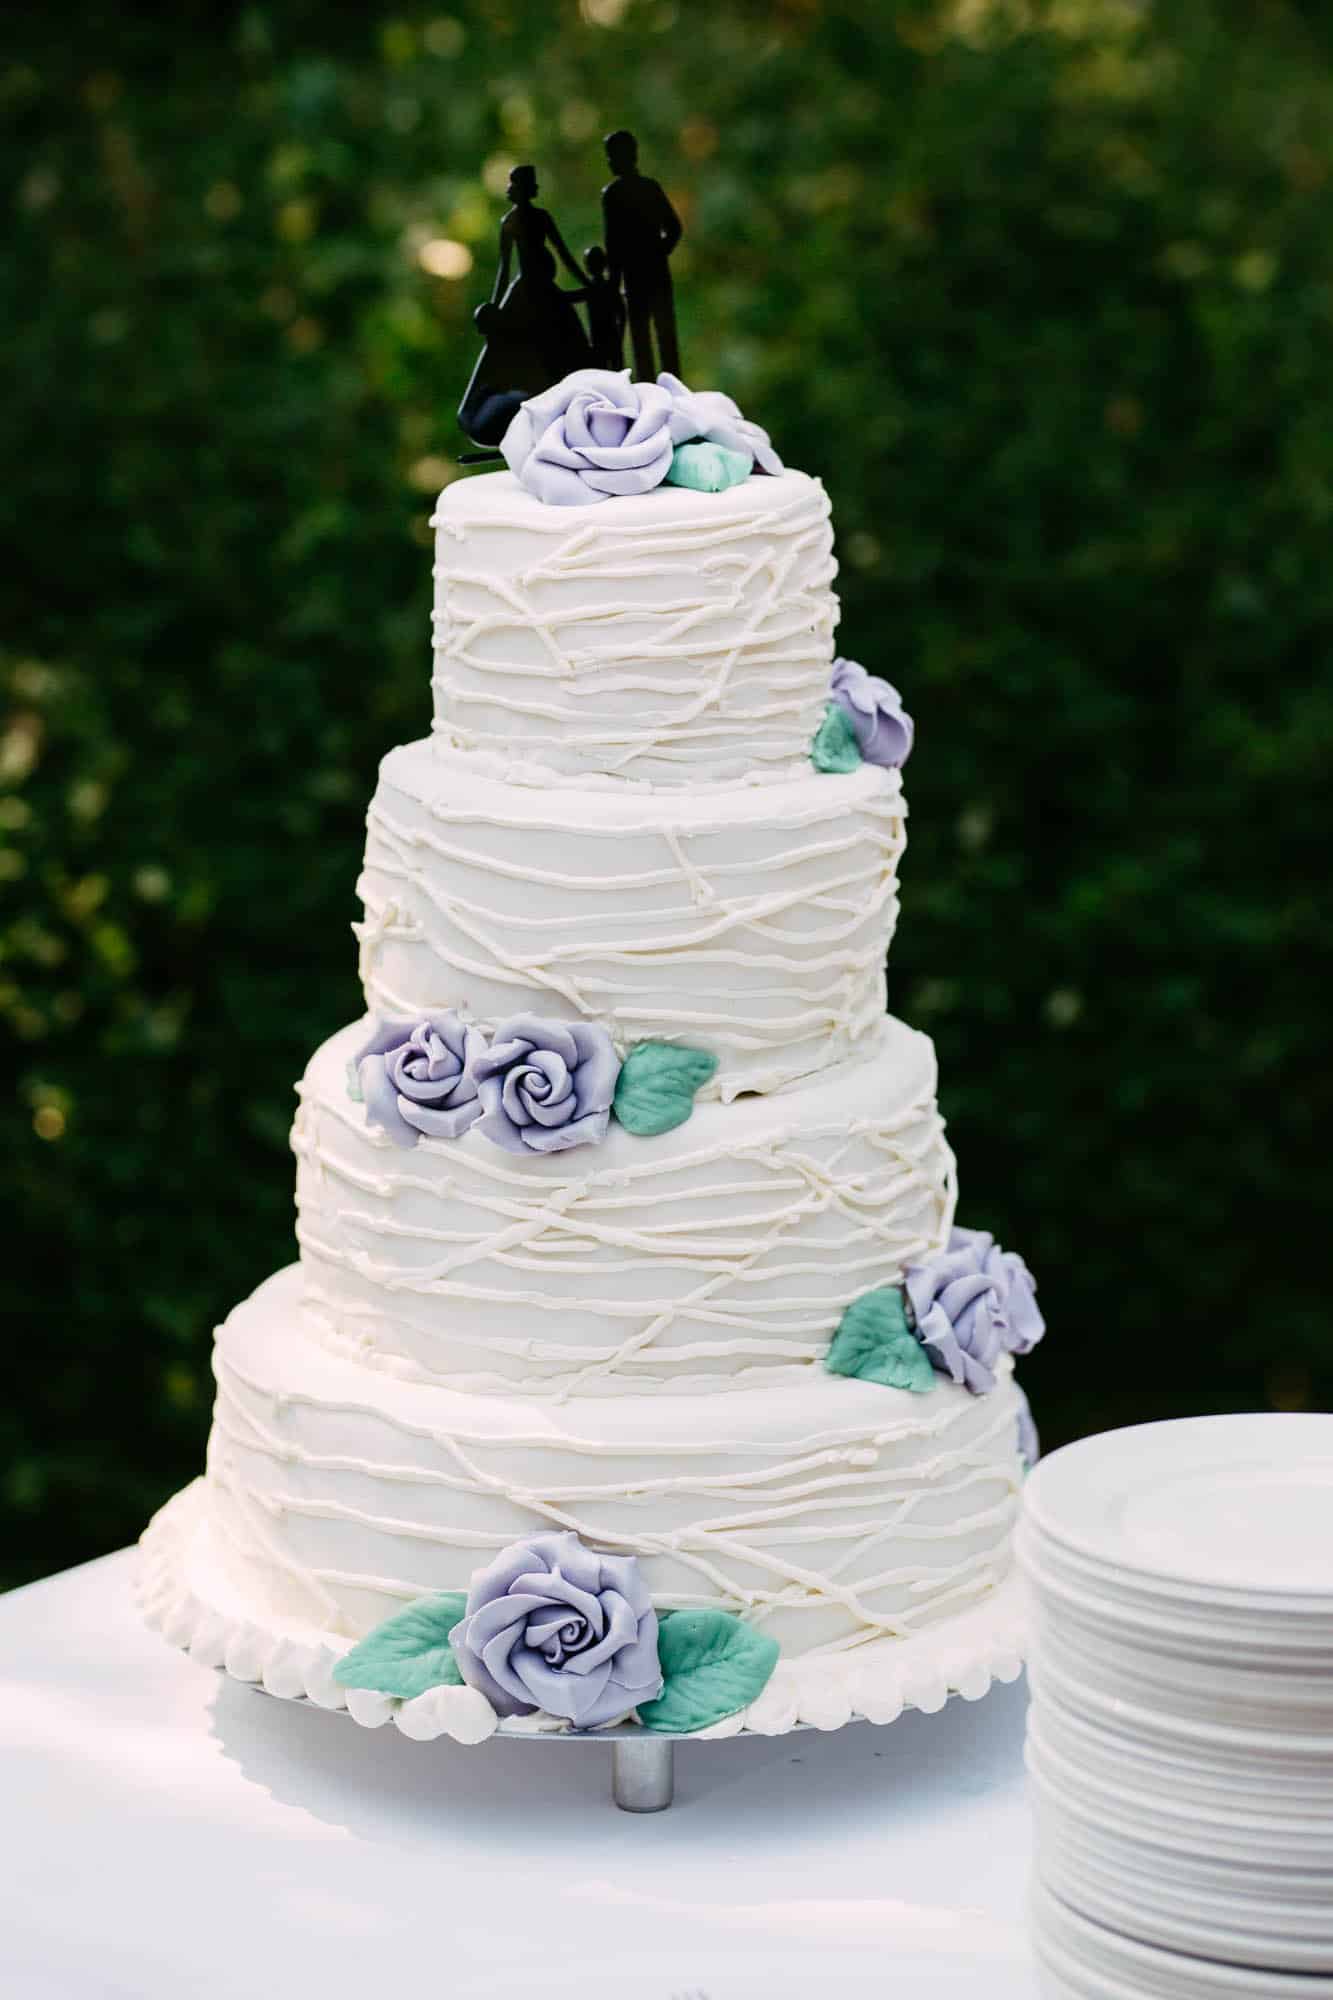 A wedding cake with a couple on top.